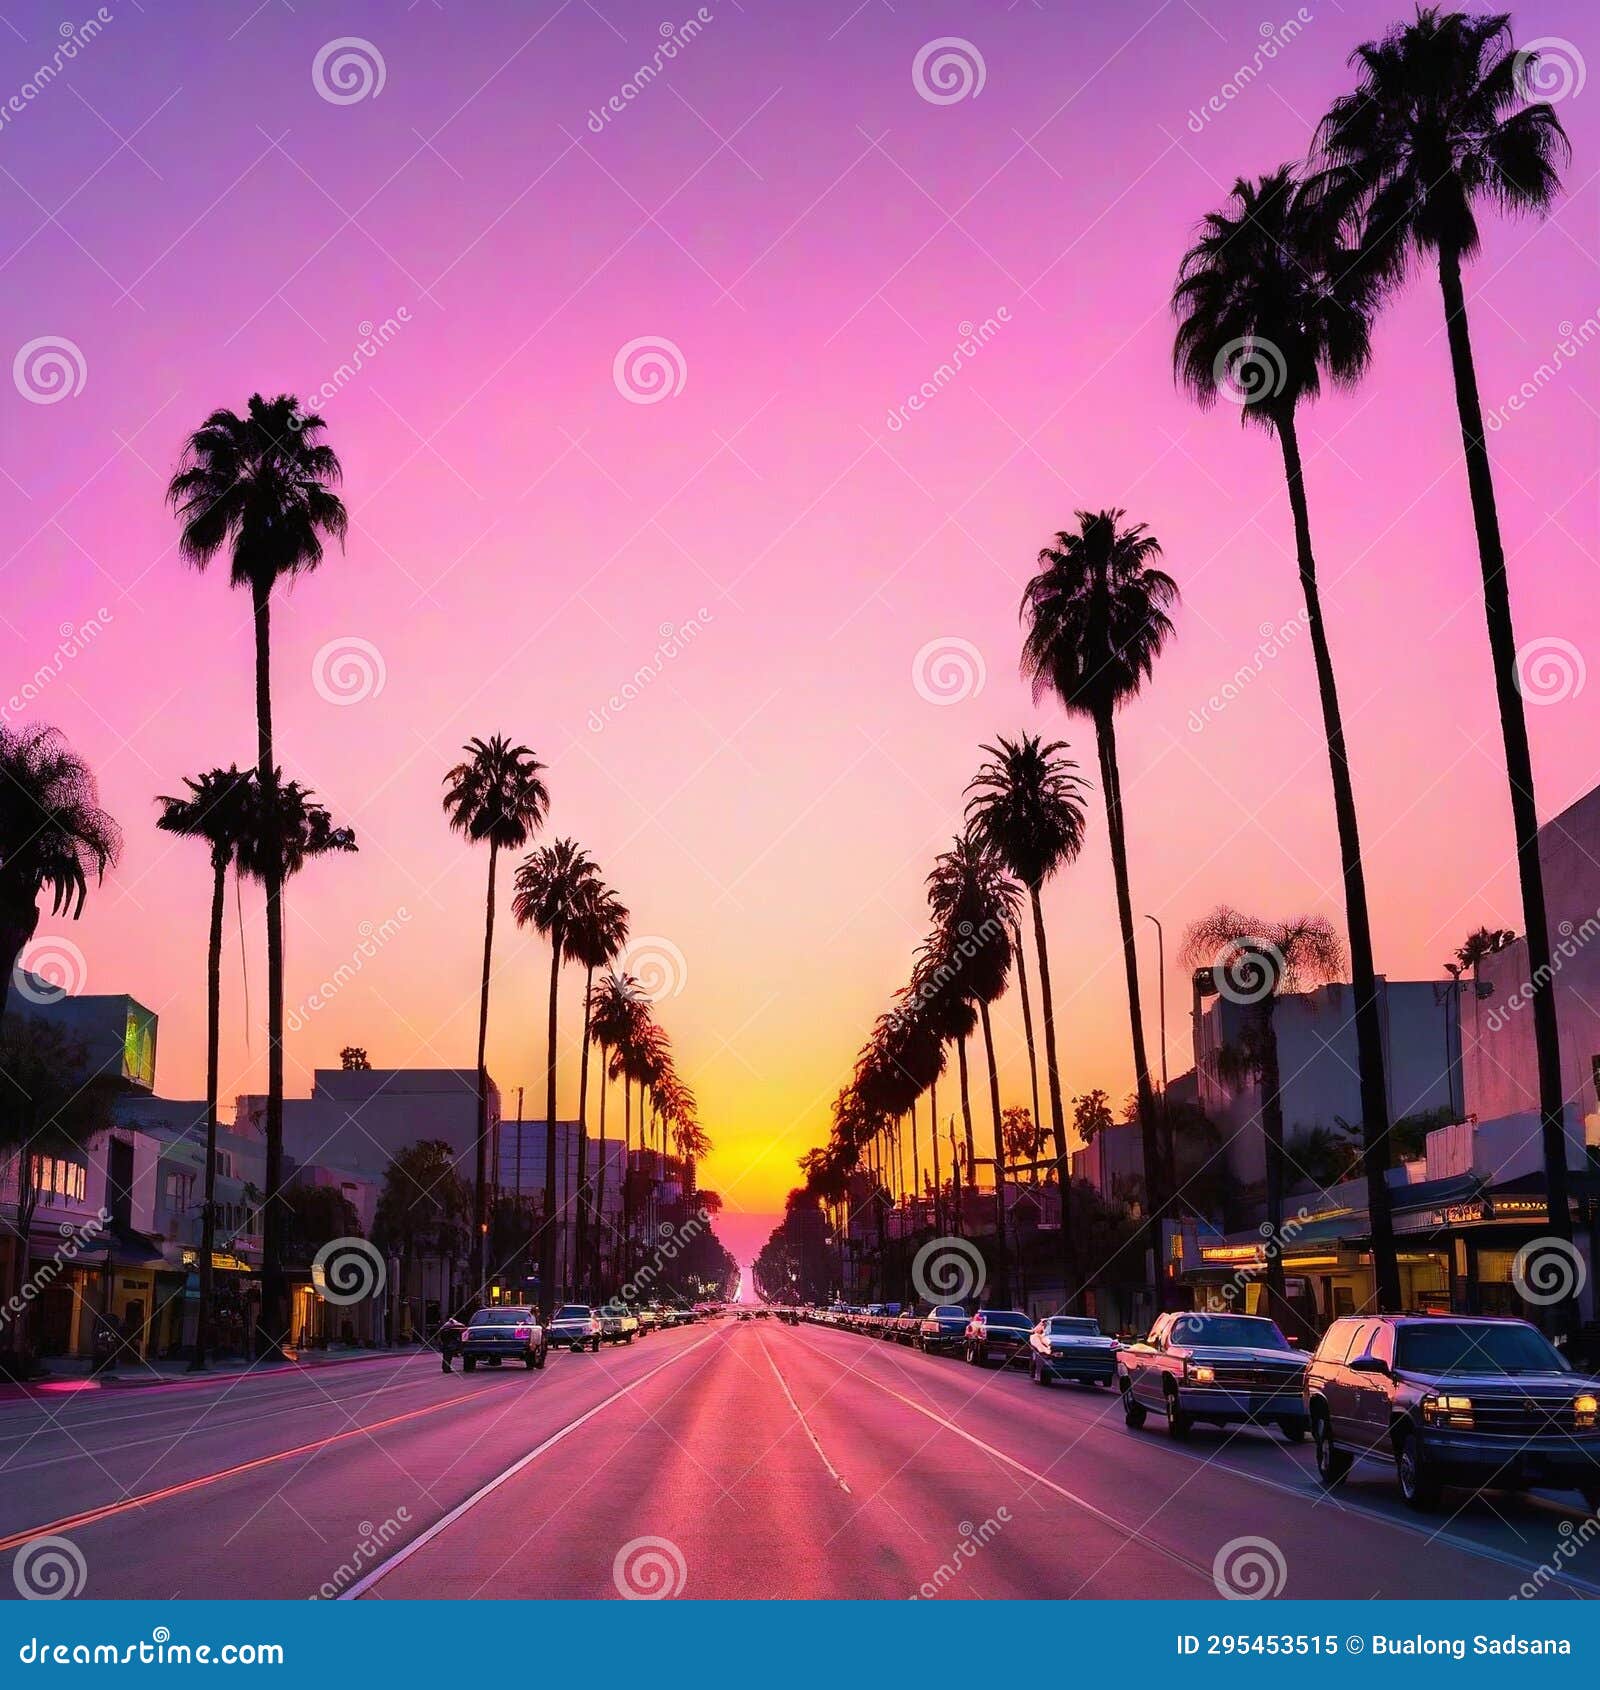 sunrise at sunset boulevard with pink sky and the palm tree lined